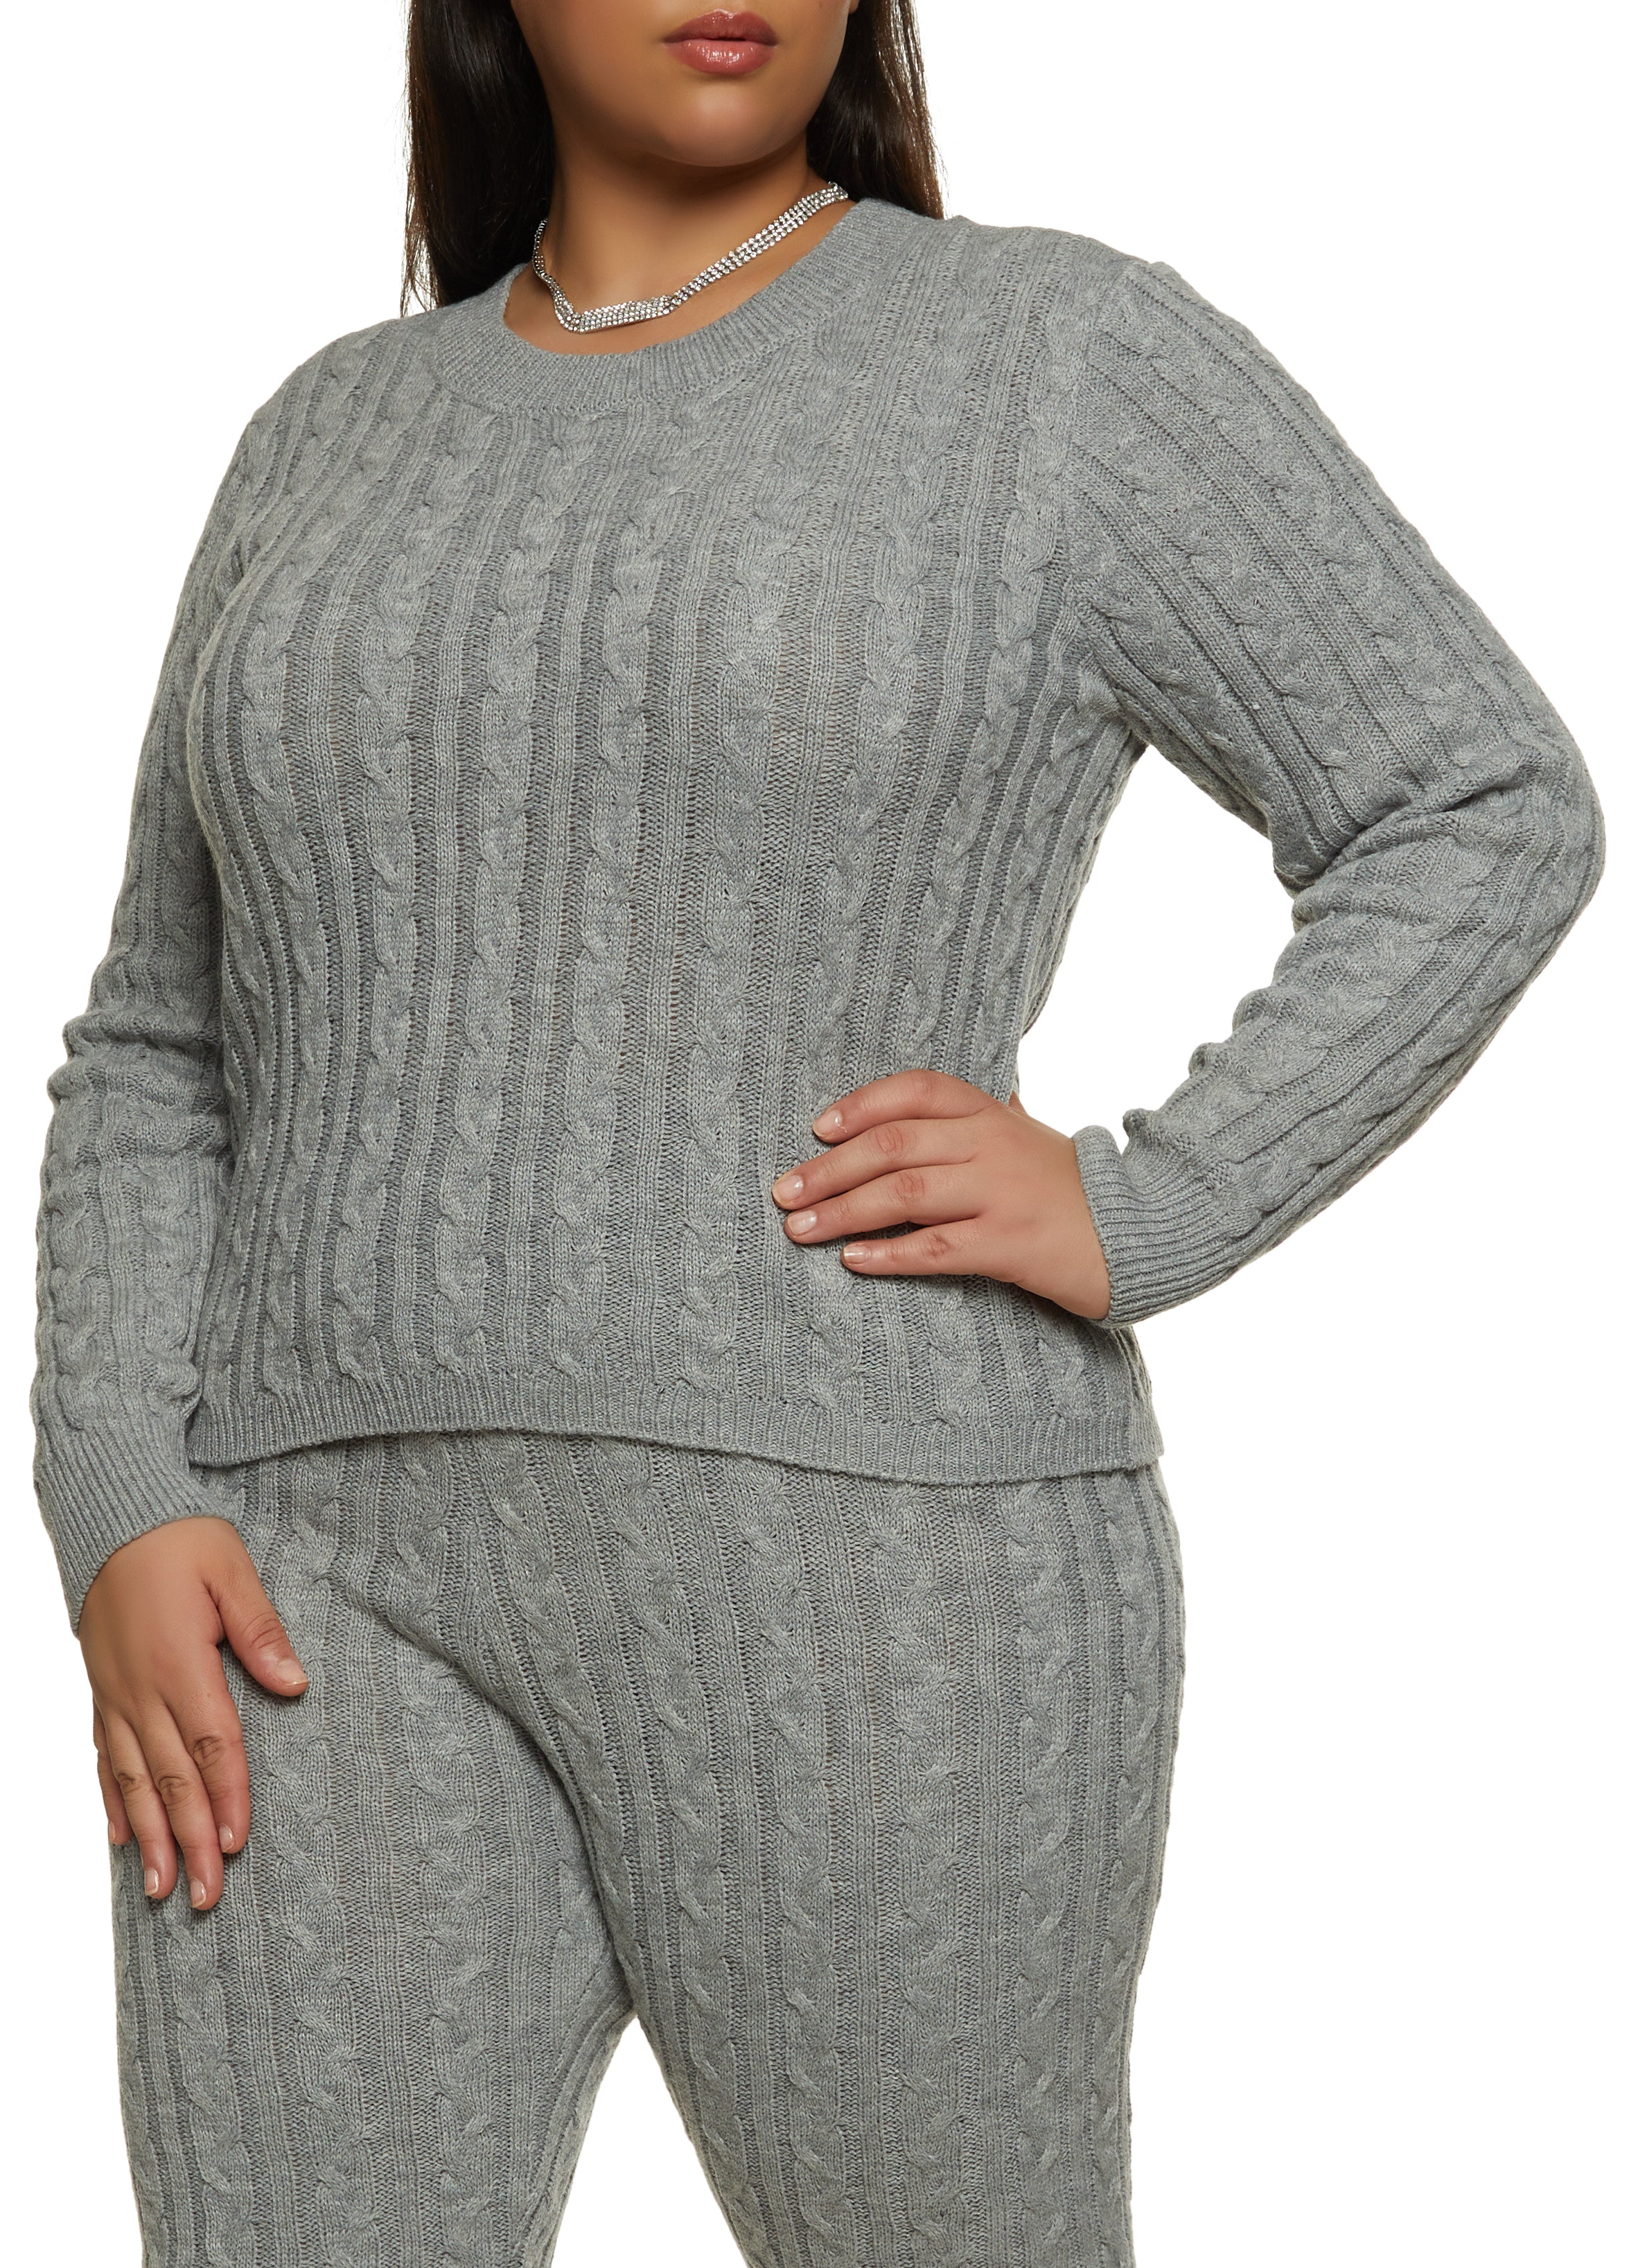 Plus Size Cable Knit Sweater - Heather